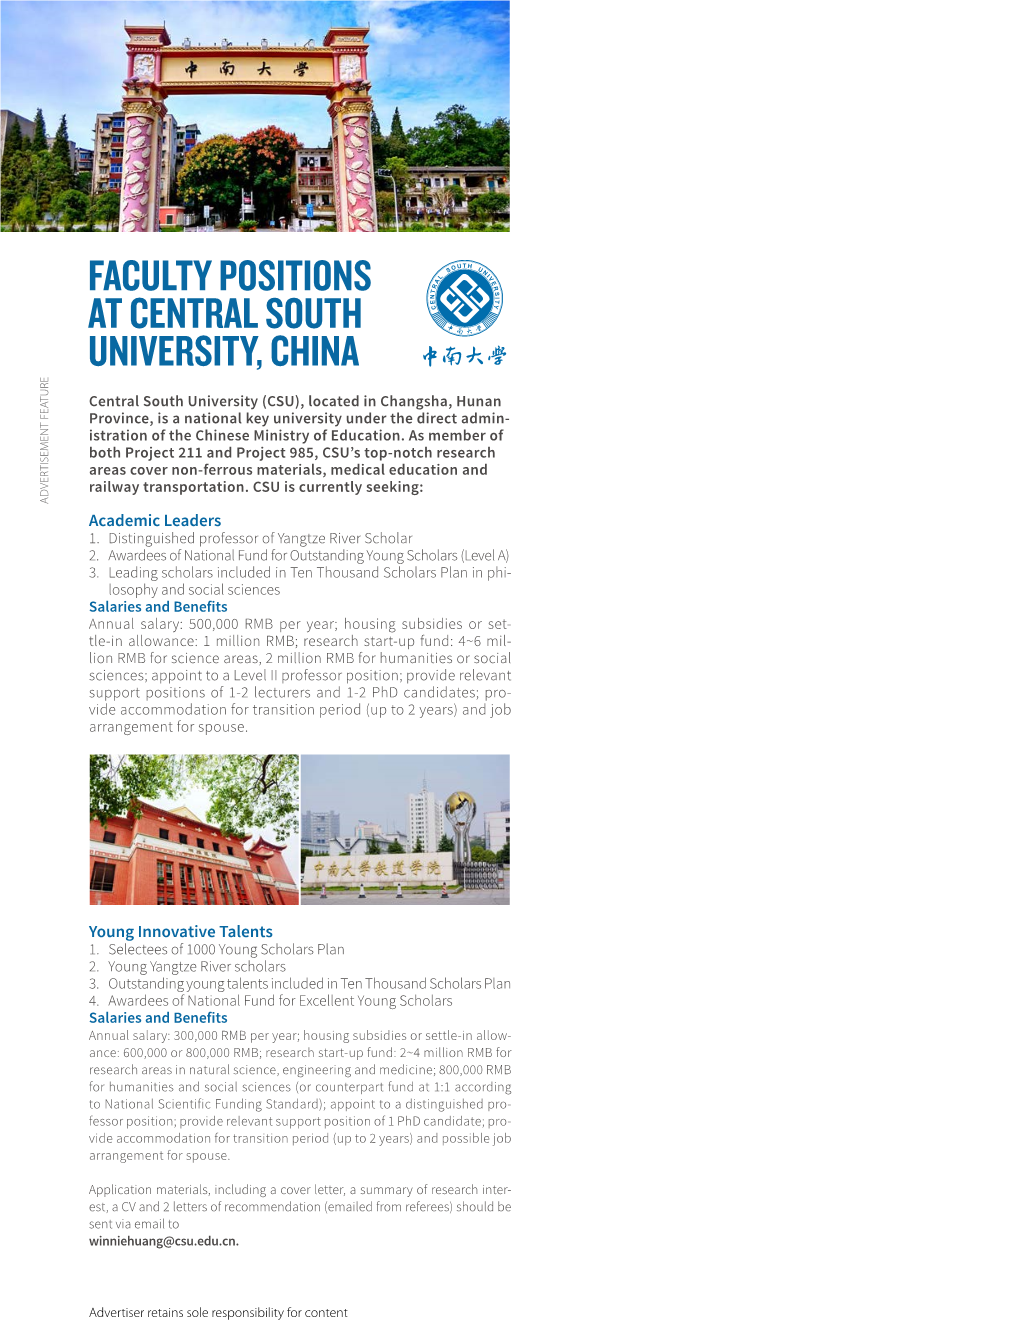 Faculty Positions at Central South University, China